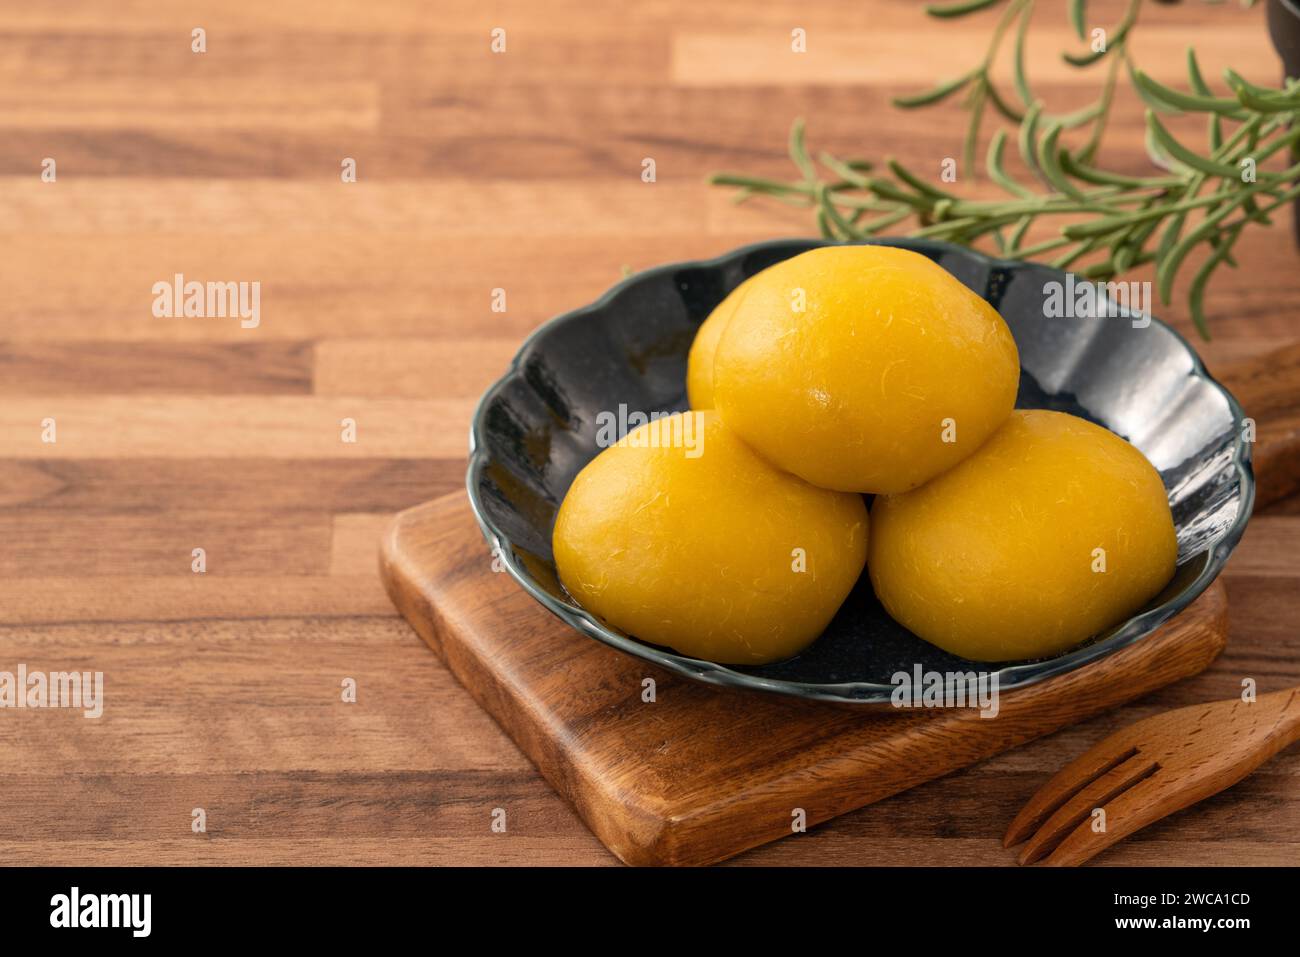 Homemade sweet potato yam bun with ground pork meat, mushroom and chopped bamboo shoot fillings inside in a bowl on wooden table background. Stock Photo